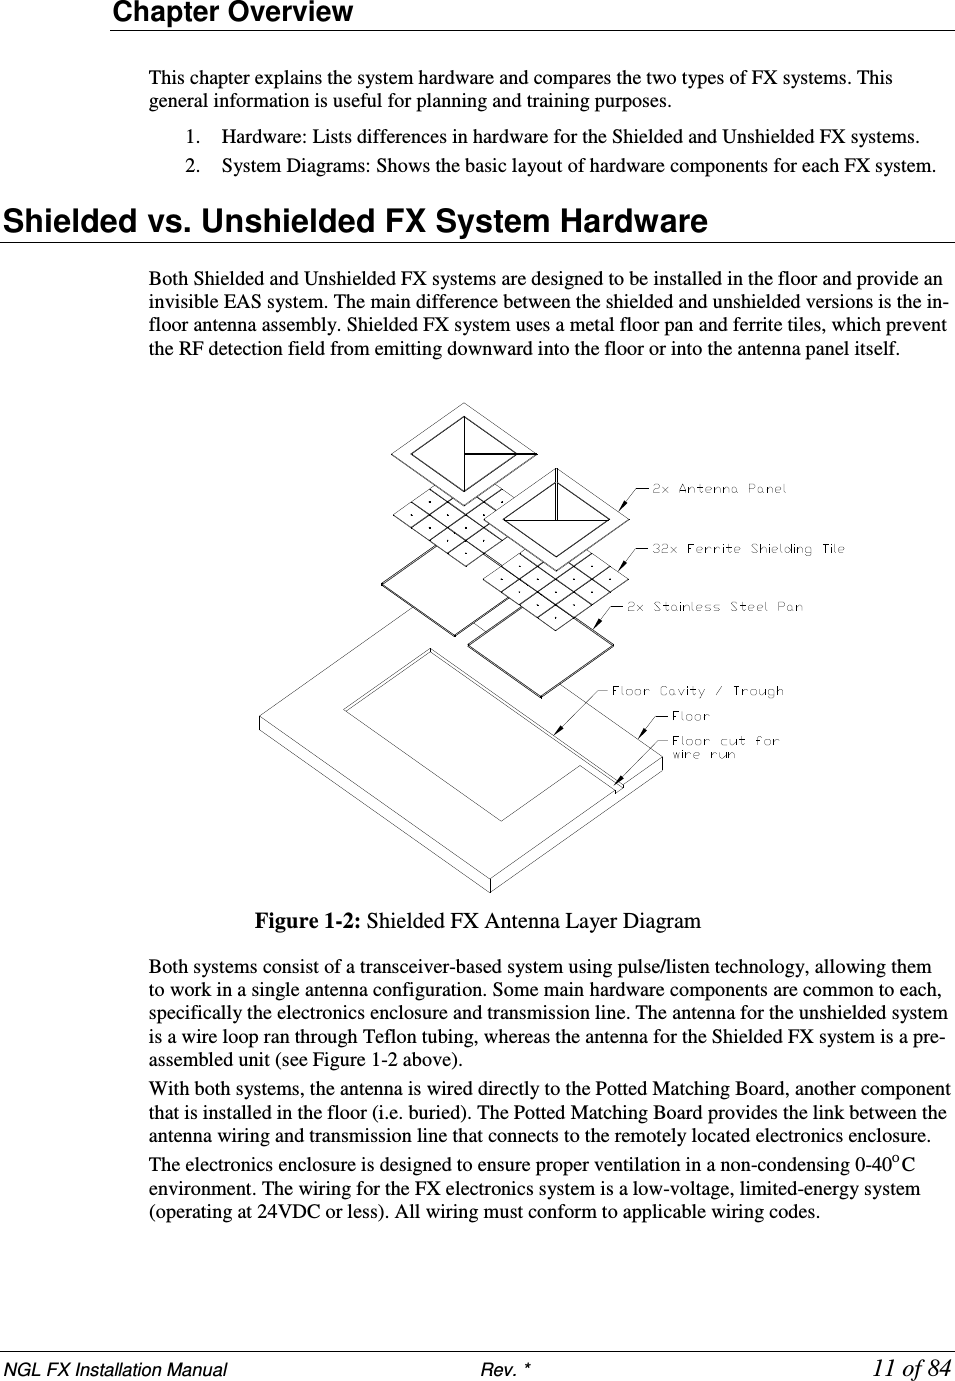 NGL FX Installation Manual                           Rev. *            11 of 84 Chapter Overview  This chapter explains the system hardware and compares the two types of FX systems. This general information is useful for planning and training purposes.  1.  Hardware: Lists differences in hardware for the Shielded and Unshielded FX systems. 2.  System Diagrams: Shows the basic layout of hardware components for each FX system.  Shielded vs. Unshielded FX System Hardware Both Shielded and Unshielded FX systems are designed to be installed in the floor and provide an invisible EAS system. The main difference between the shielded and unshielded versions is the in-floor antenna assembly. Shielded FX system uses a metal floor pan and ferrite tiles, which prevent the RF detection field from emitting downward into the floor or into the antenna panel itself.      Figure 1-2: Shielded FX Antenna Layer Diagram    Both systems consist of a transceiver-based system using pulse/listen technology, allowing them to work in a single antenna configuration. Some main hardware components are common to each, specifically the electronics enclosure and transmission line. The antenna for the unshielded system is a wire loop ran through Teflon tubing, whereas the antenna for the Shielded FX system is a pre-assembled unit (see Figure 1-2 above).  With both systems, the antenna is wired directly to the Potted Matching Board, another component that is installed in the floor (i.e. buried). The Potted Matching Board provides the link between the antenna wiring and transmission line that connects to the remotely located electronics enclosure. The electronics enclosure is designed to ensure proper ventilation in a non-condensing 0-40O C environment. The wiring for the FX electronics system is a low-voltage, limited-energy system (operating at 24VDC or less). All wiring must conform to applicable wiring codes.  